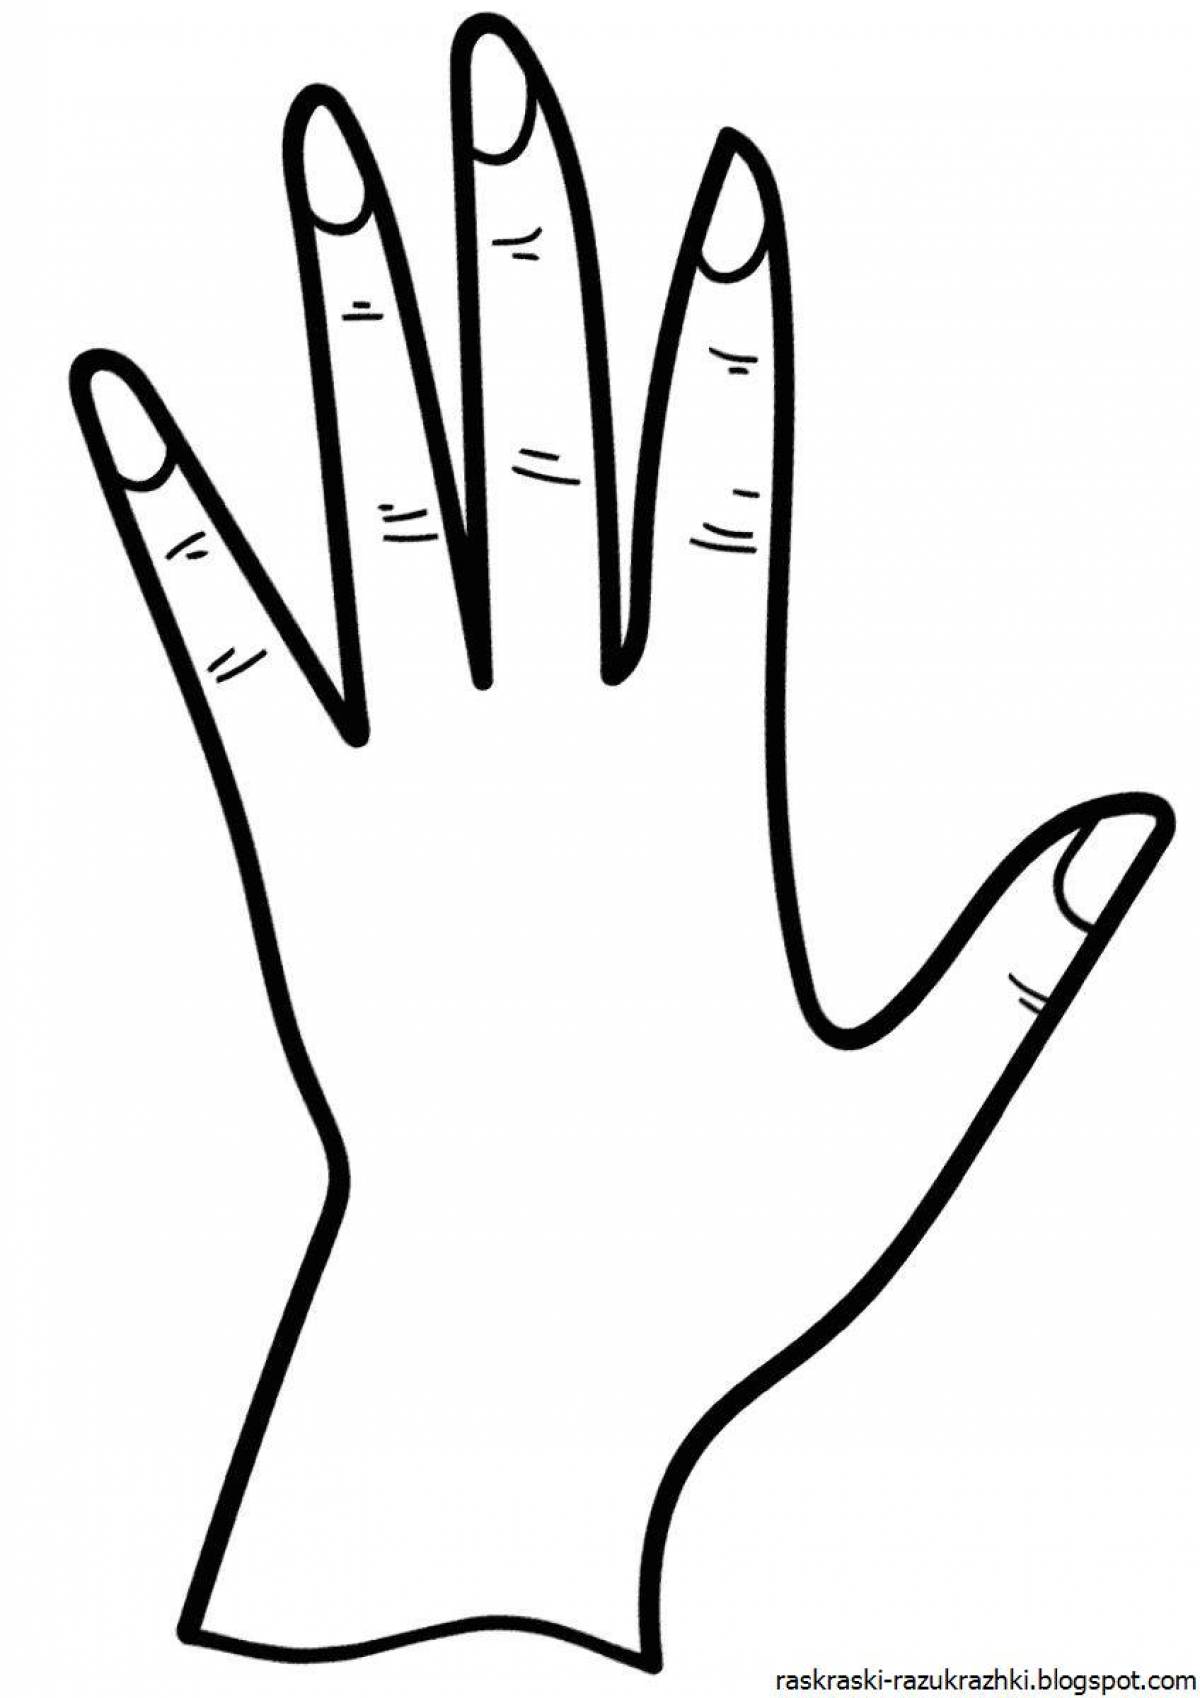 Fun hands coloring page